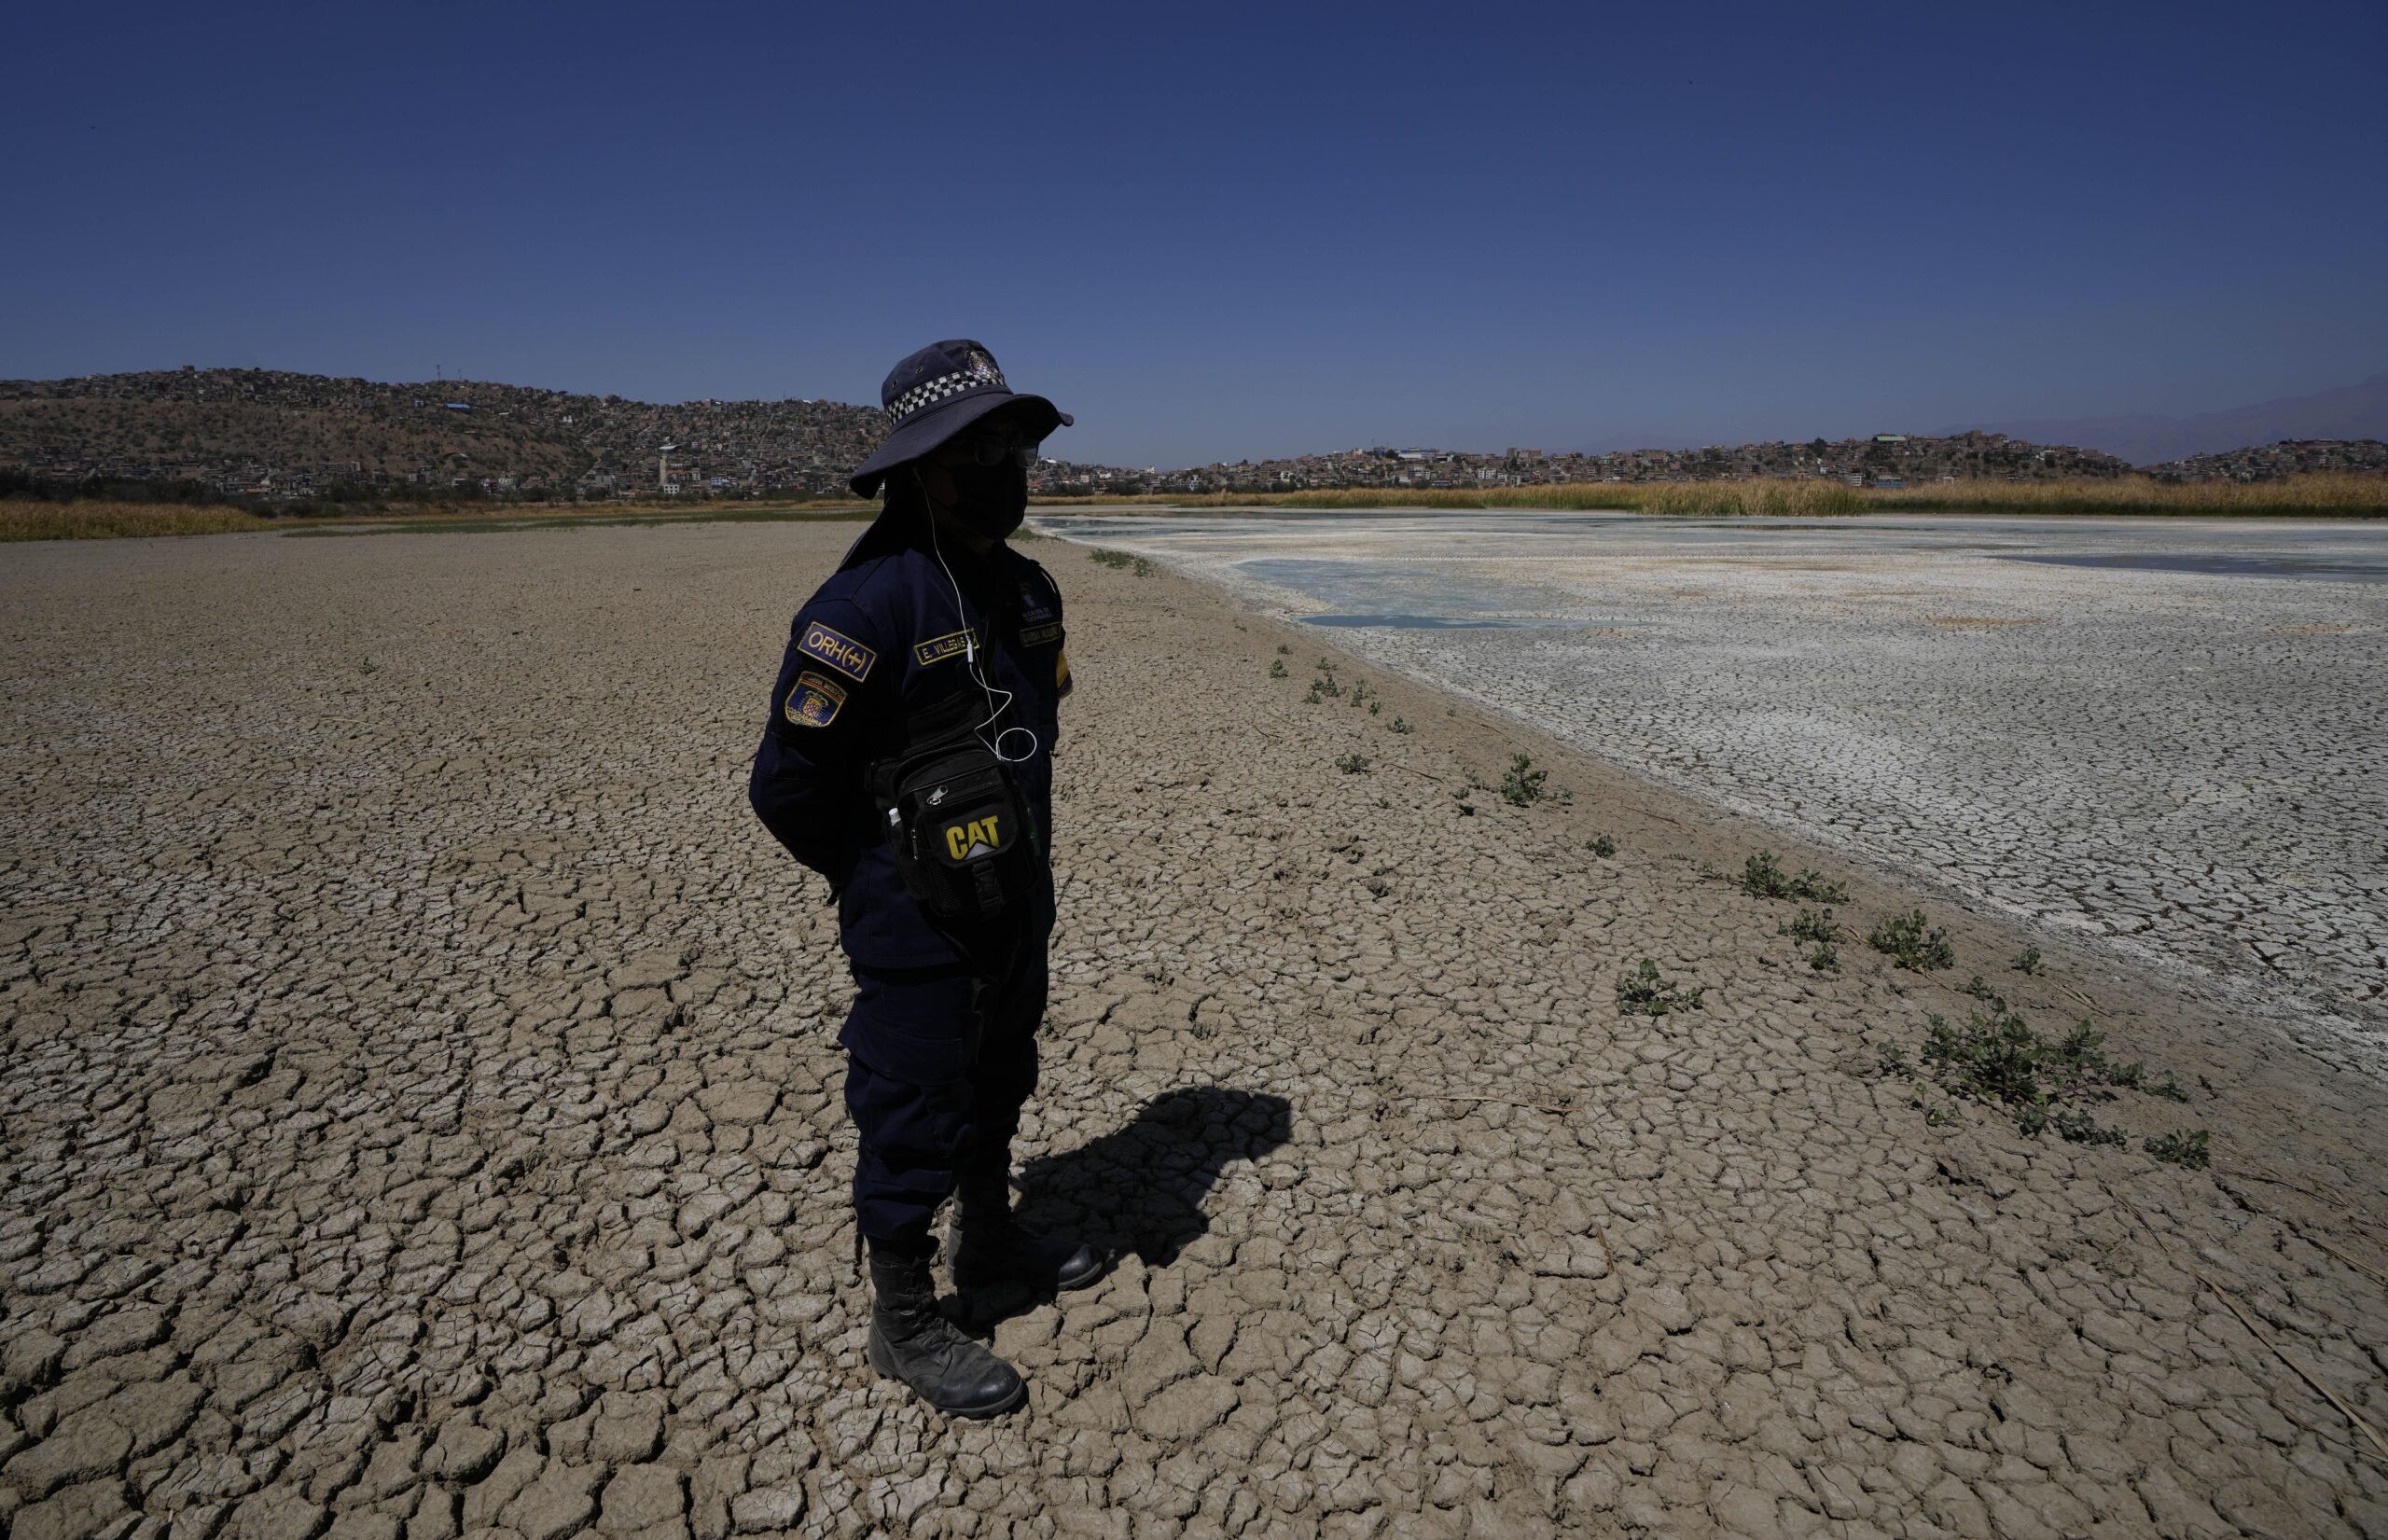 More than half of the world’s large lakes are drying up